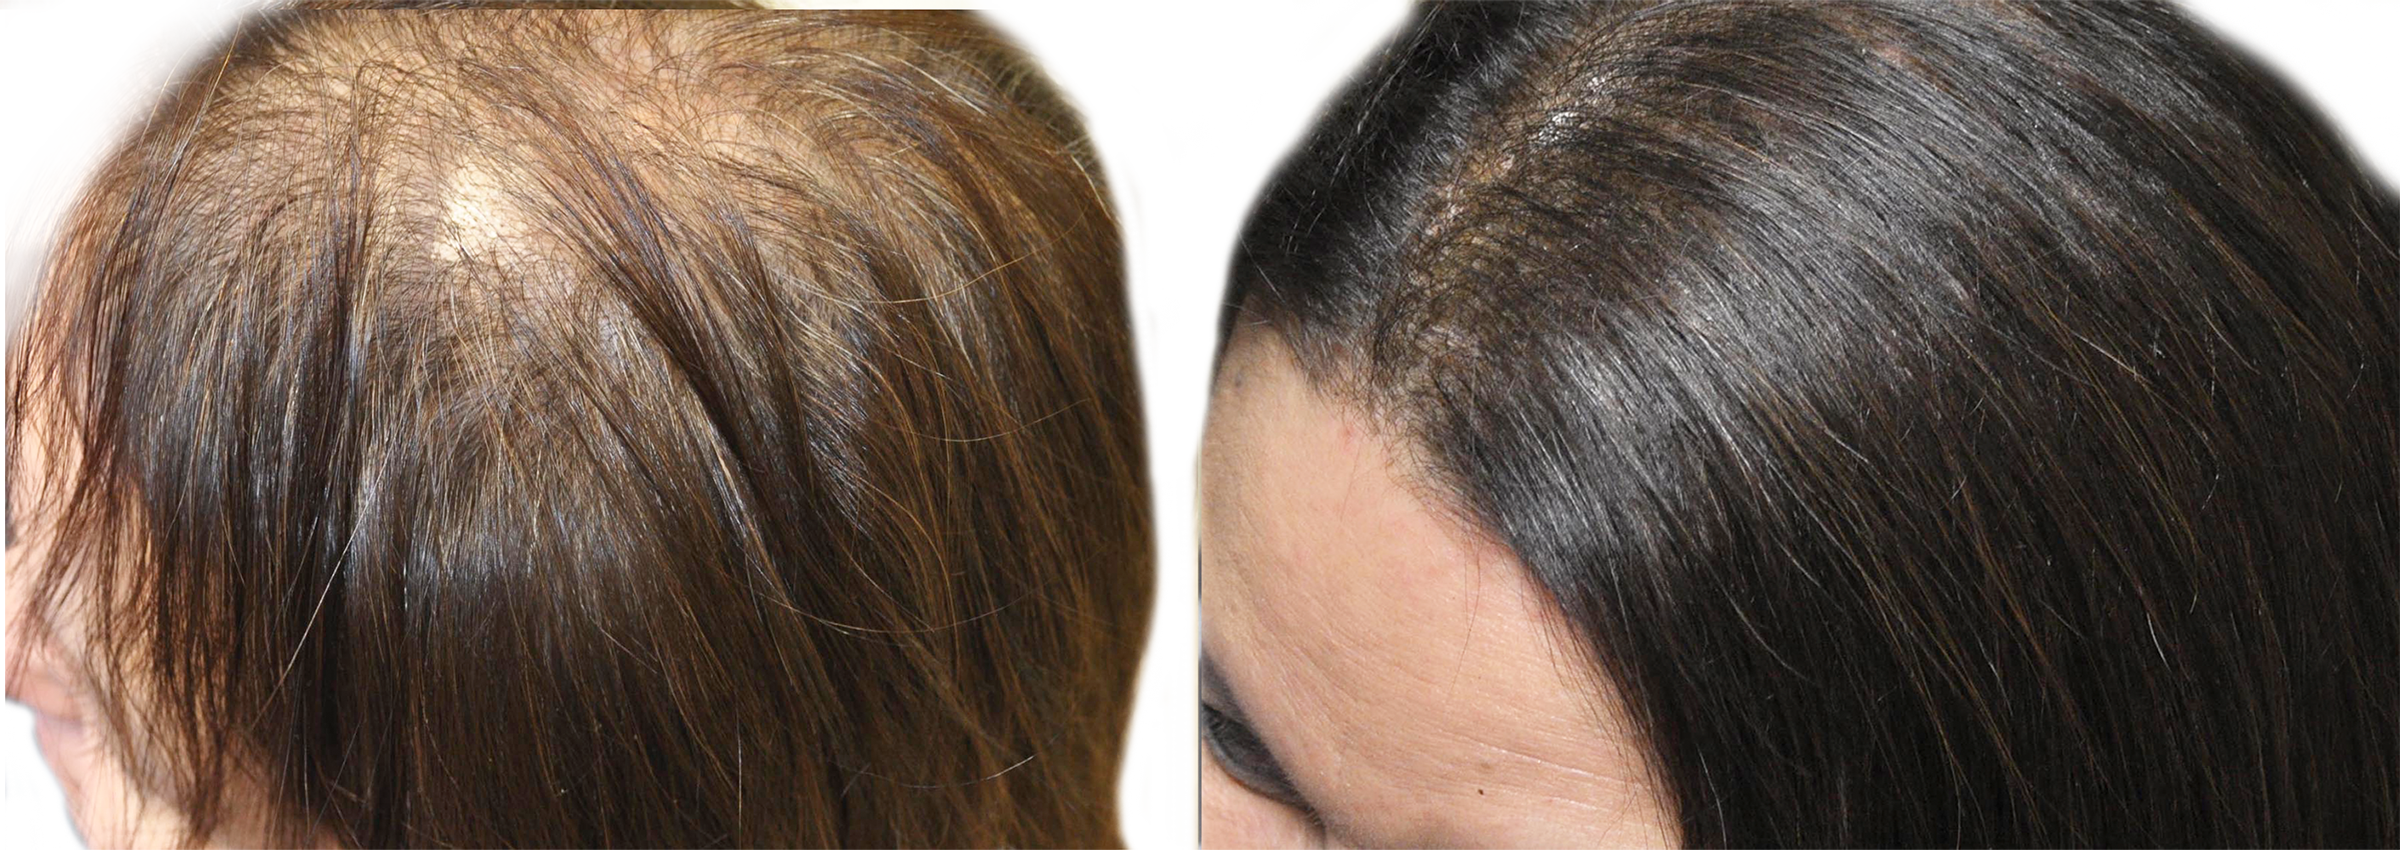 Long Island hair rejuvenation before and after